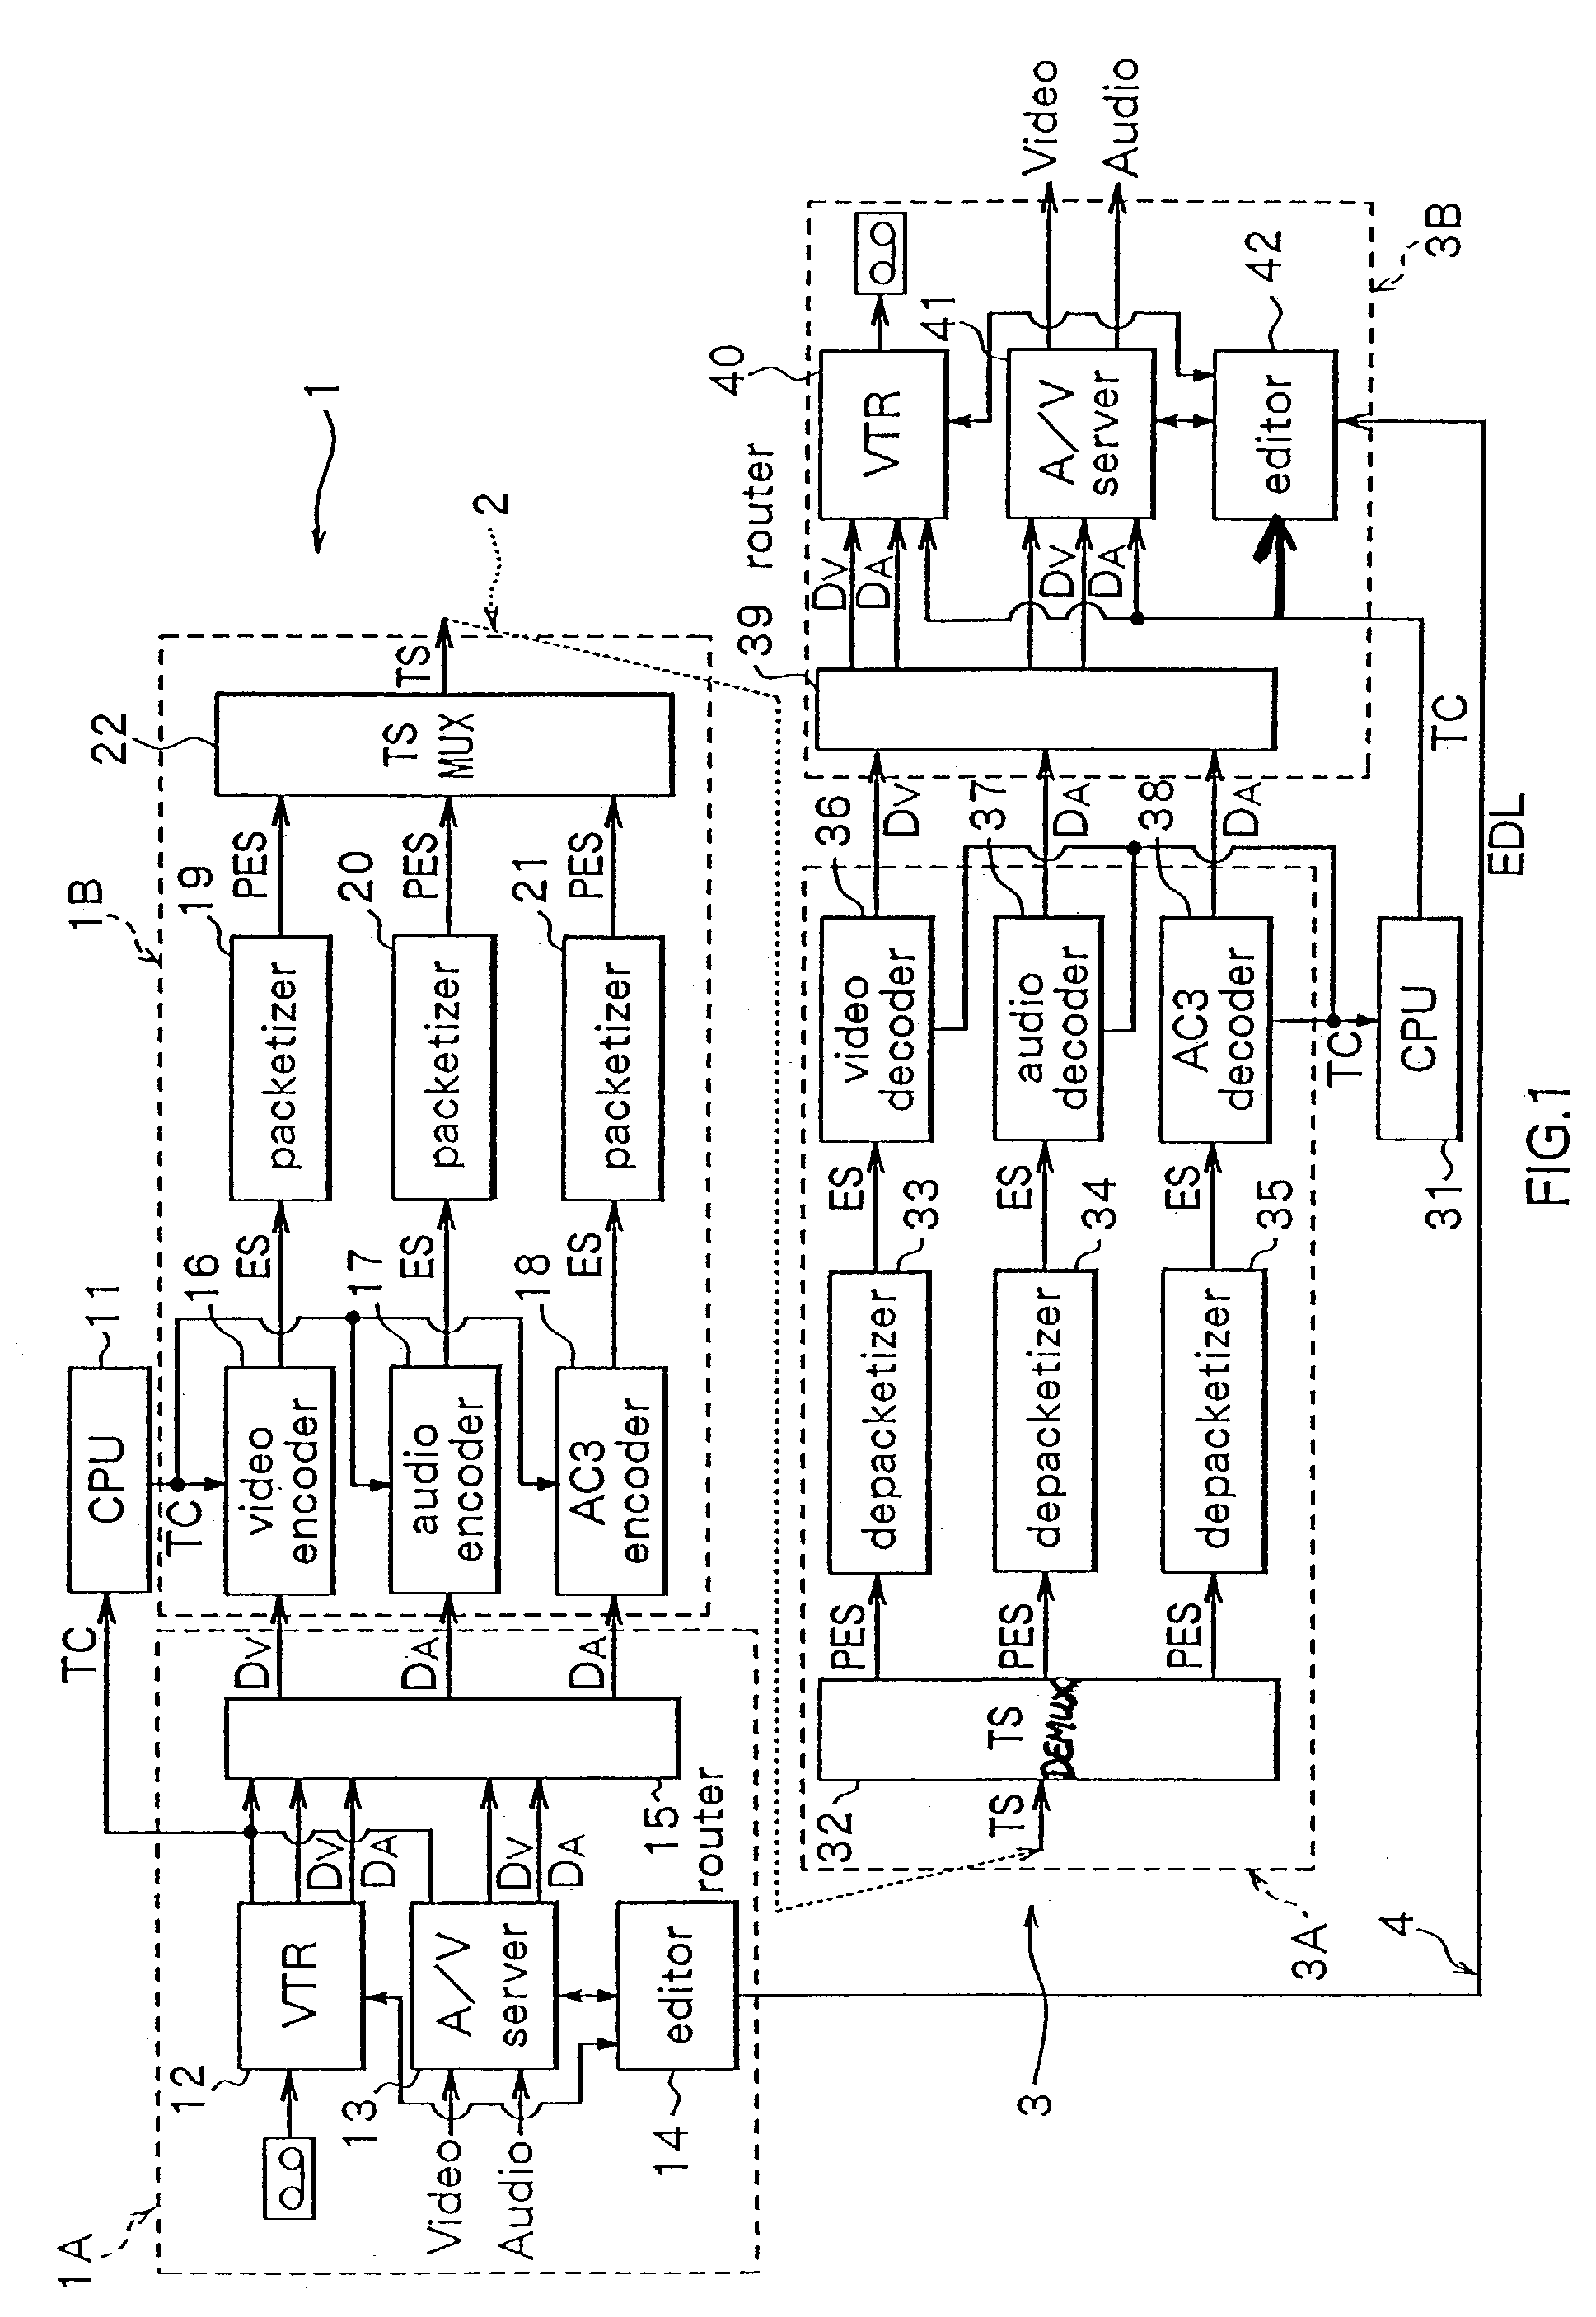 Encoded stream generating apparatus and method, data transmission system and method, and editing system and method